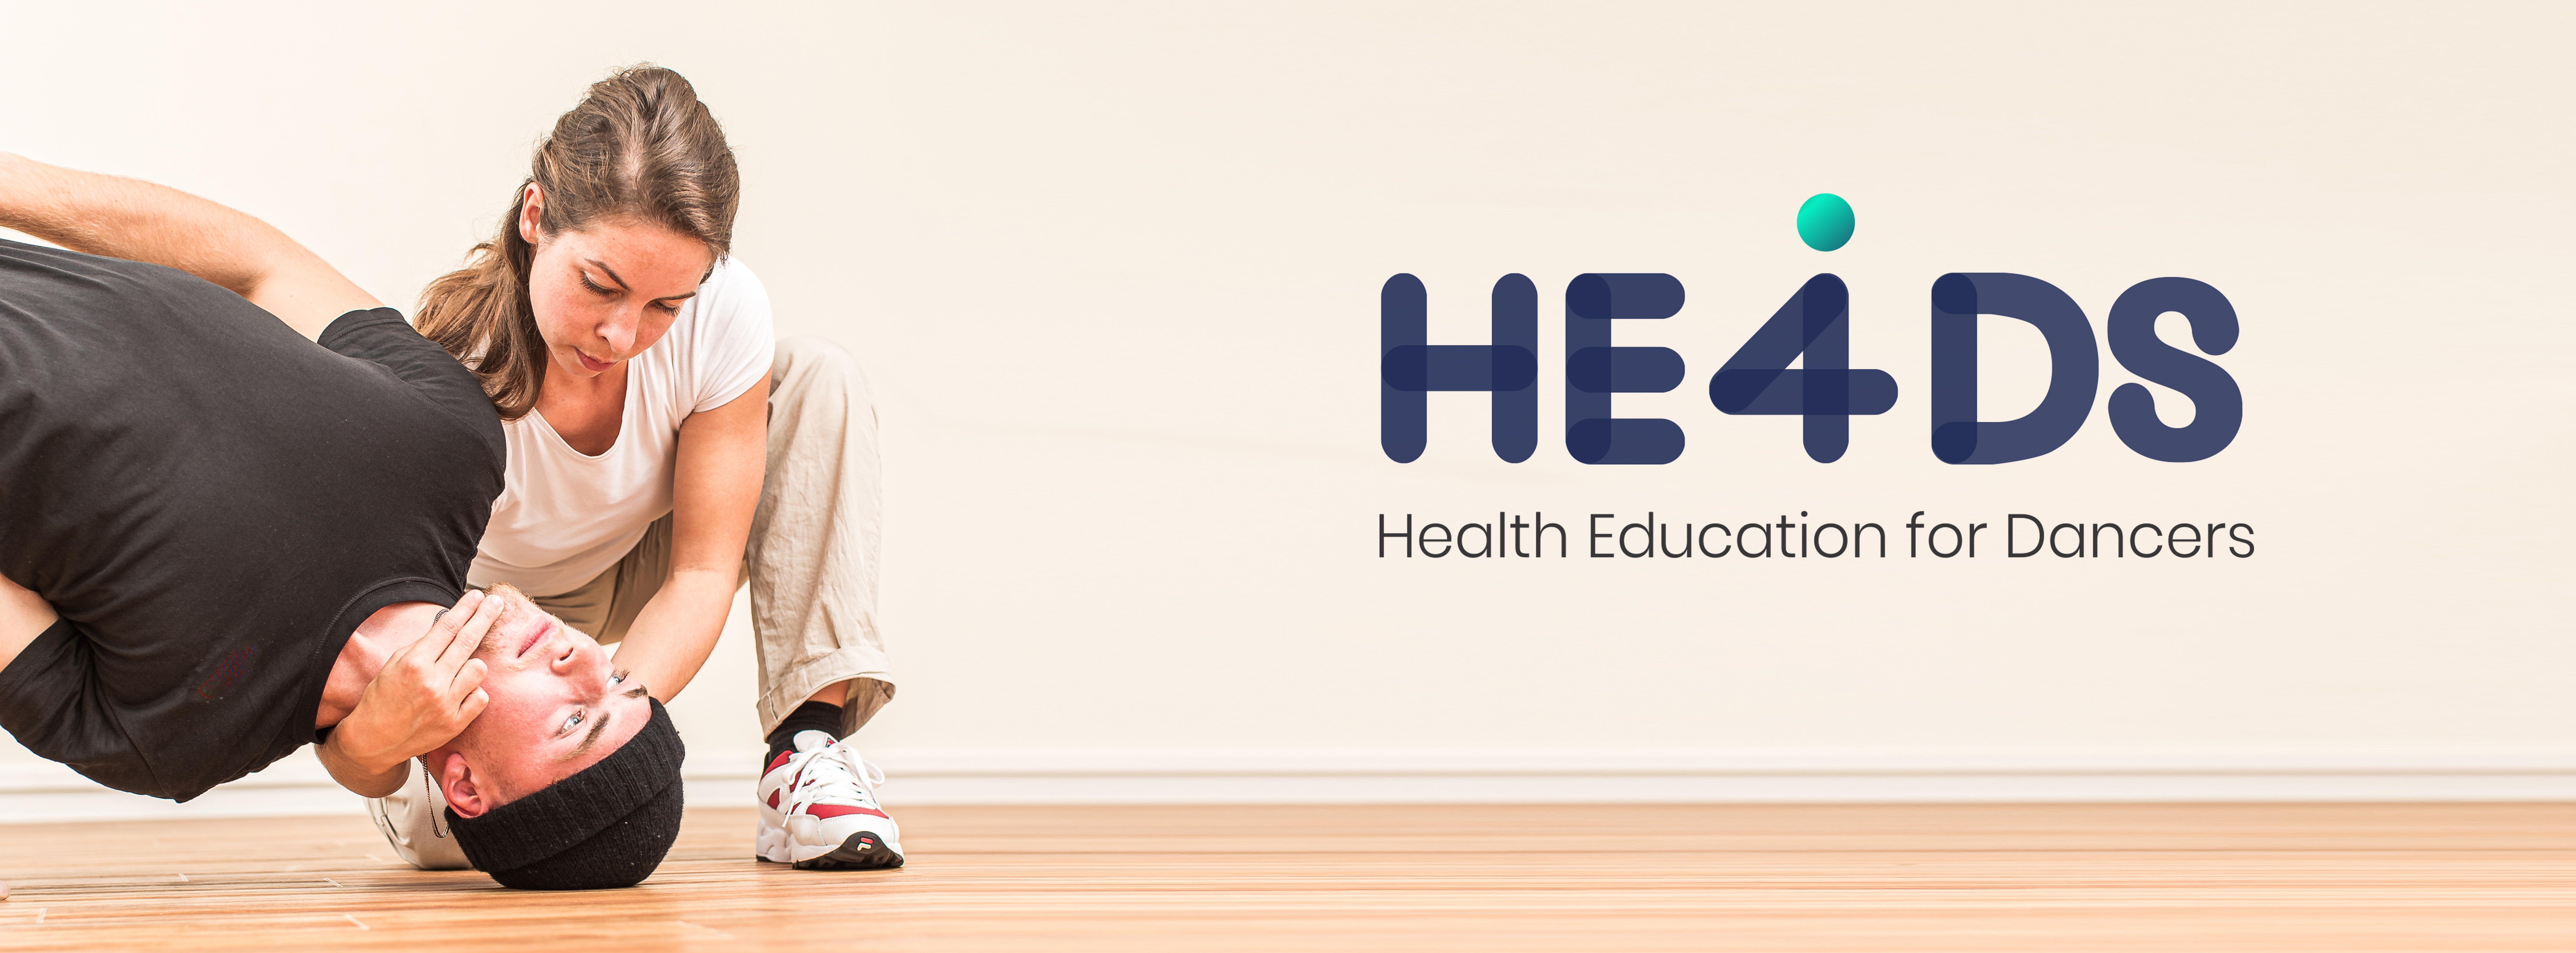 HE4DS - Health Education for Dancers